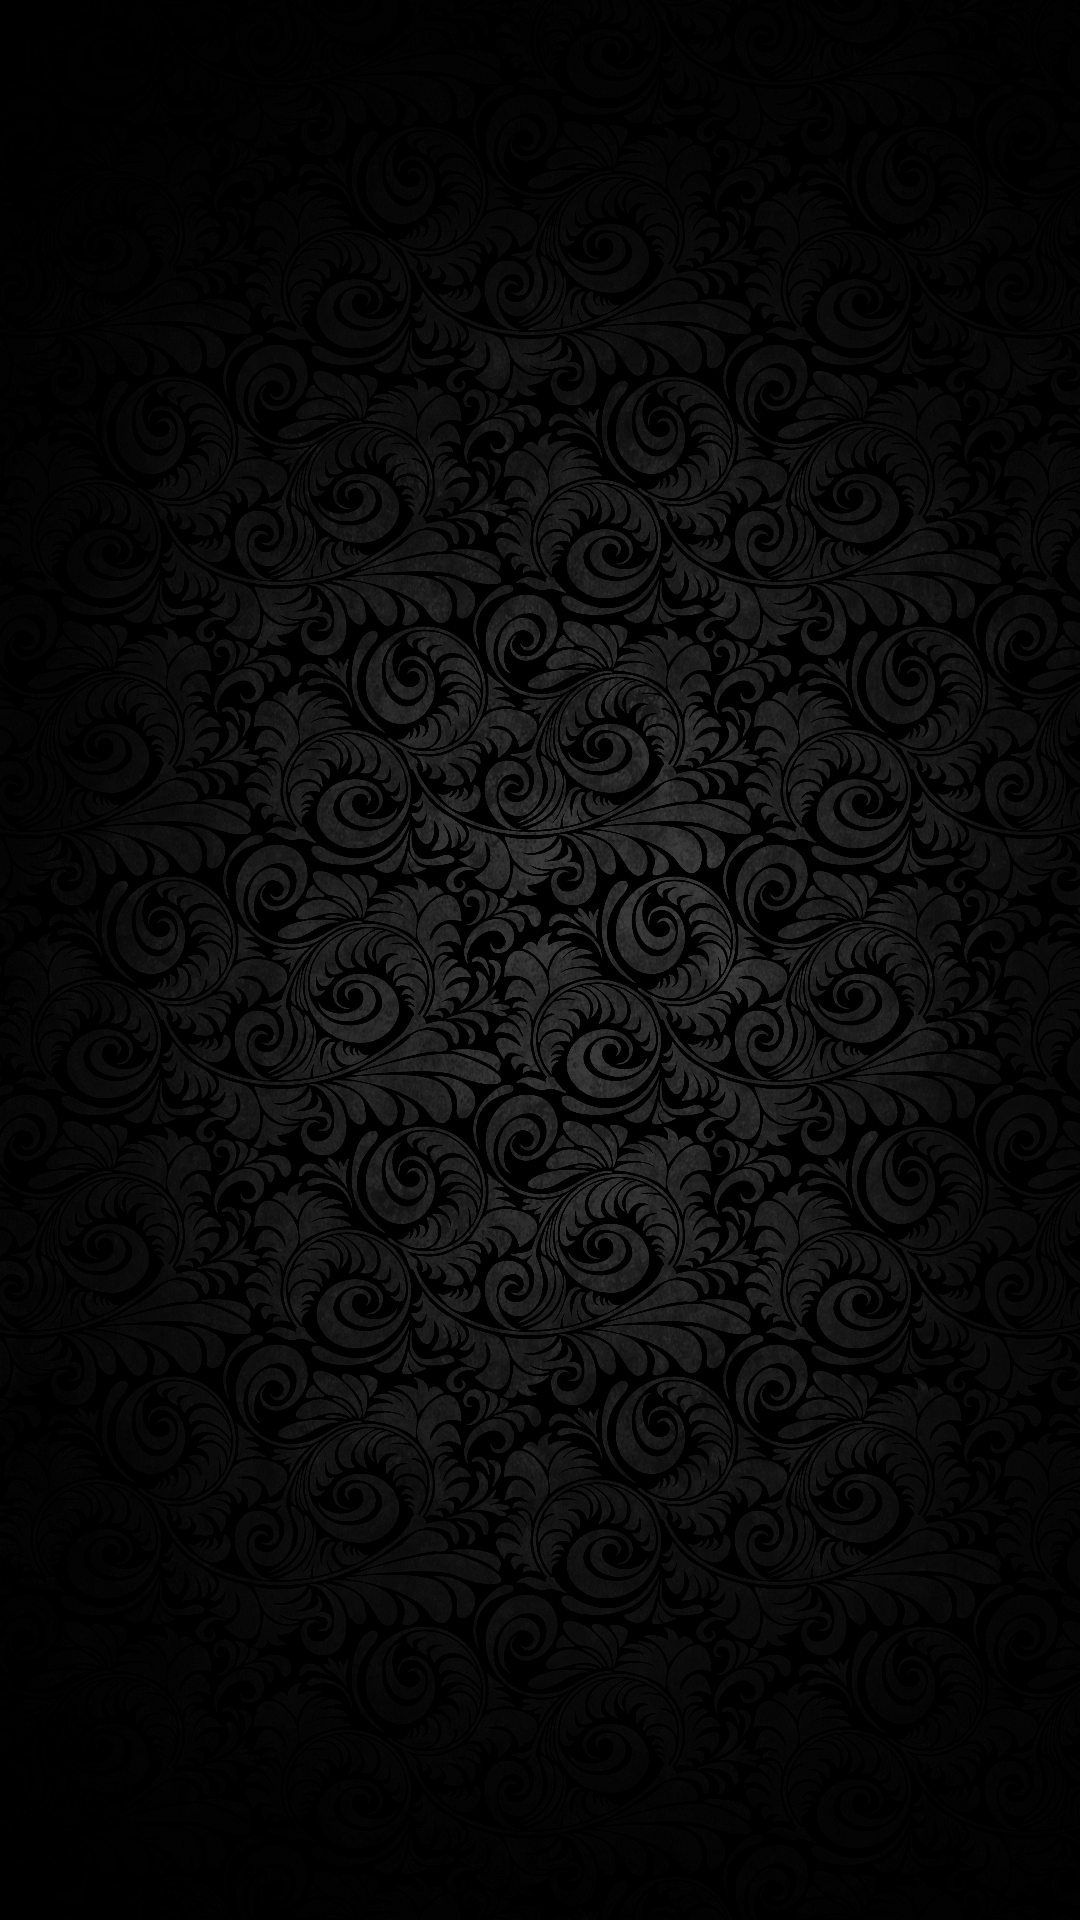 Black Phone Background Awesome Wallpaper Weekends Simply Black iPhone Wallpaper This Month of The Hudson